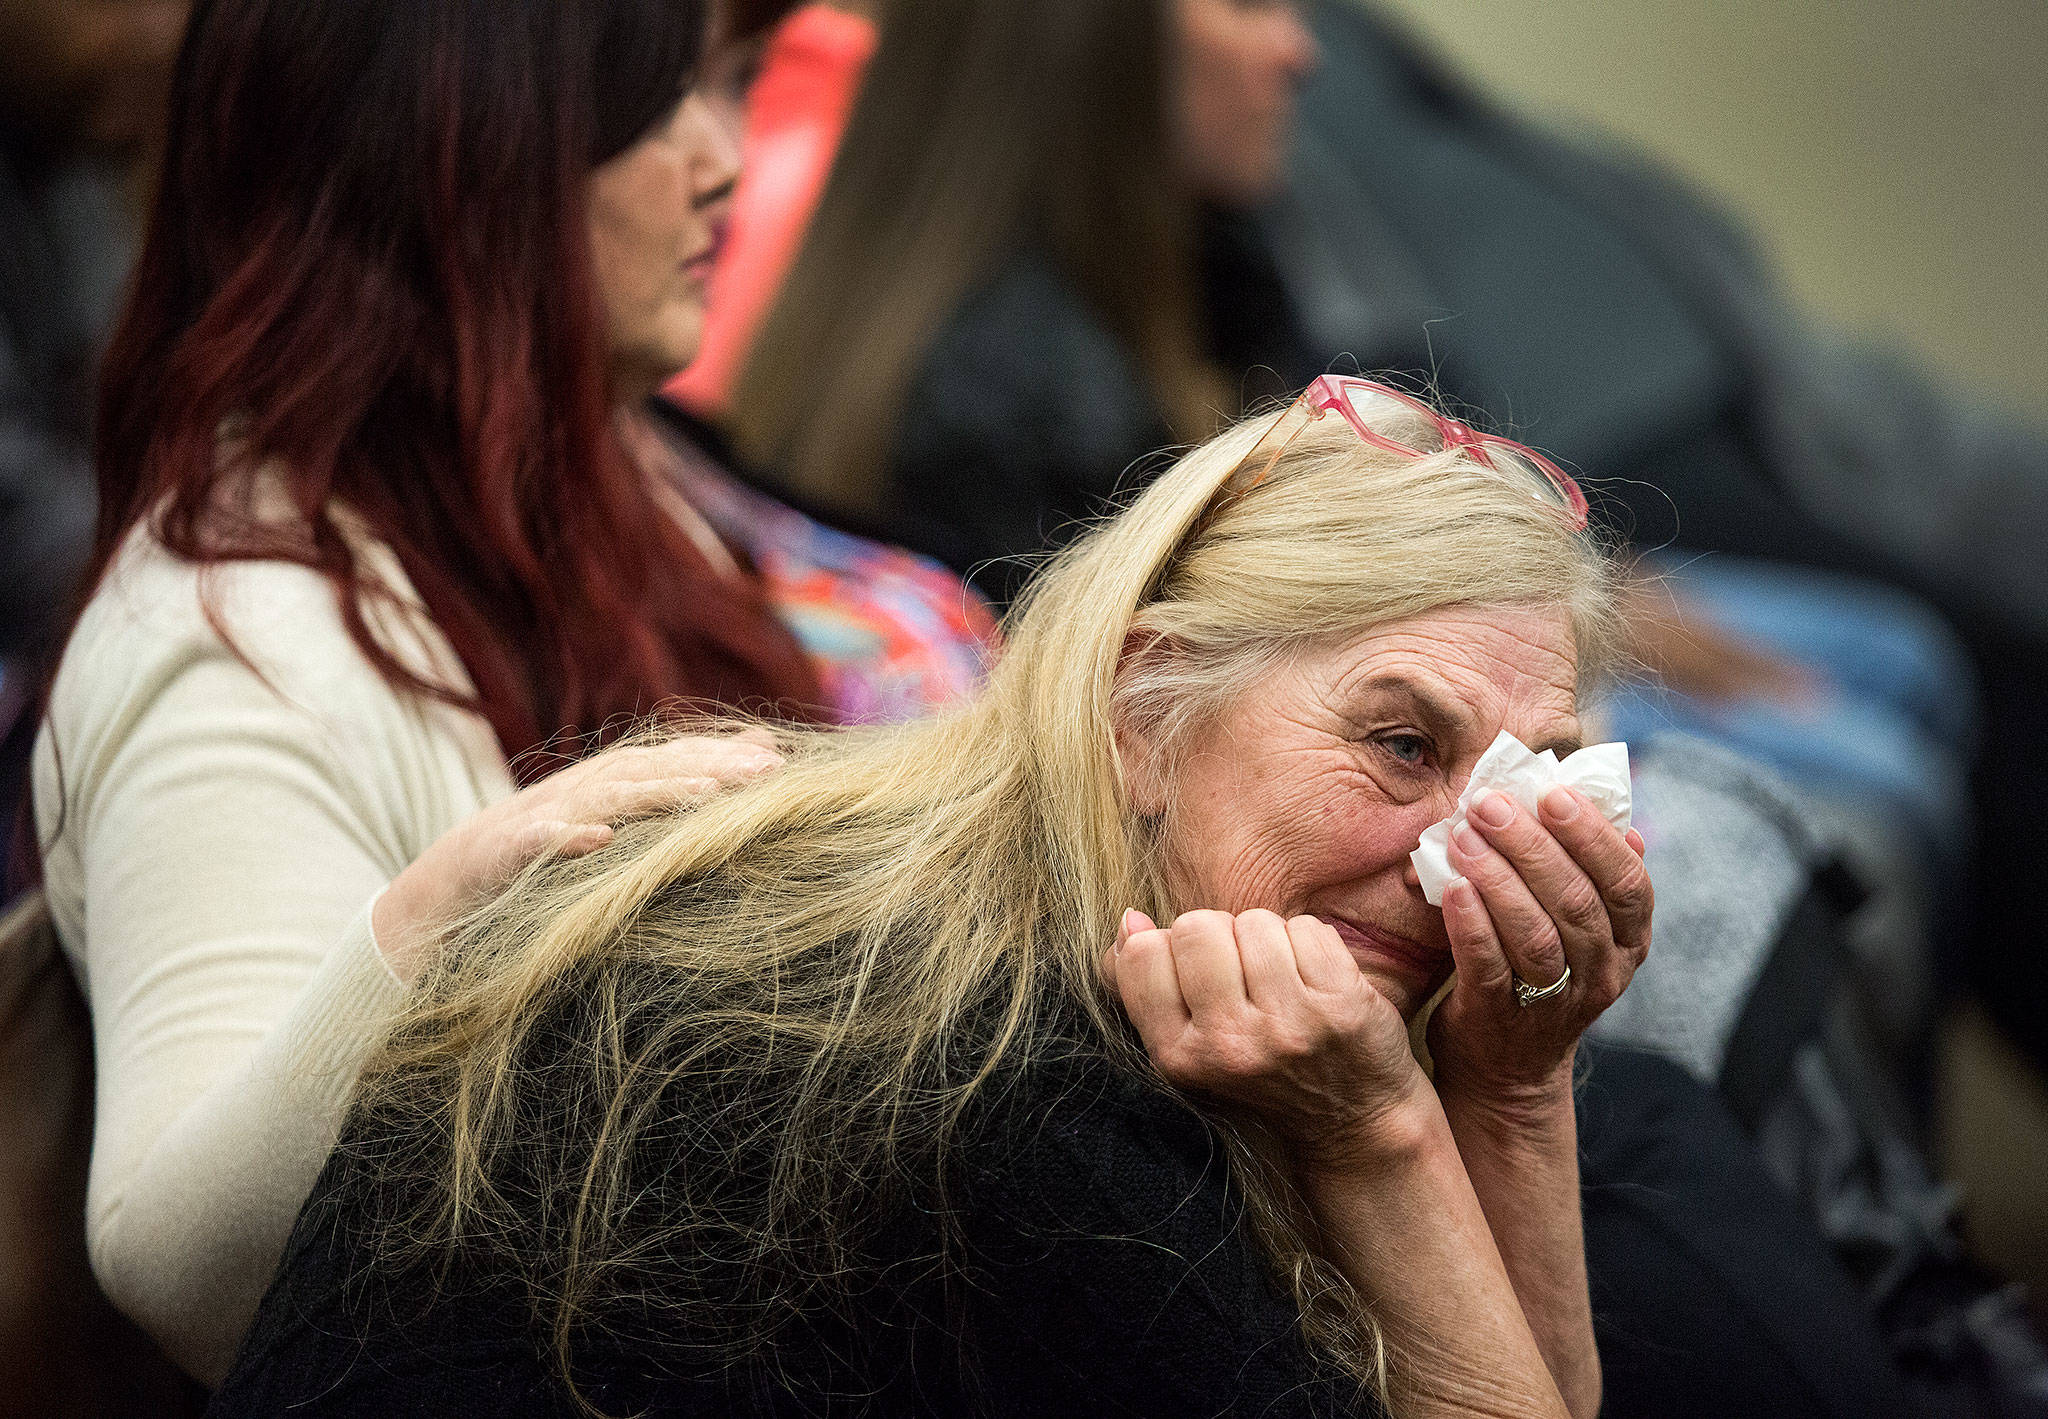 Beth Hynek reacts as family members talks about Julie Knetchel, an Everett mother who was shot to death while trying to protect her son from armed intruders. (Andy Bronson / The Herald)